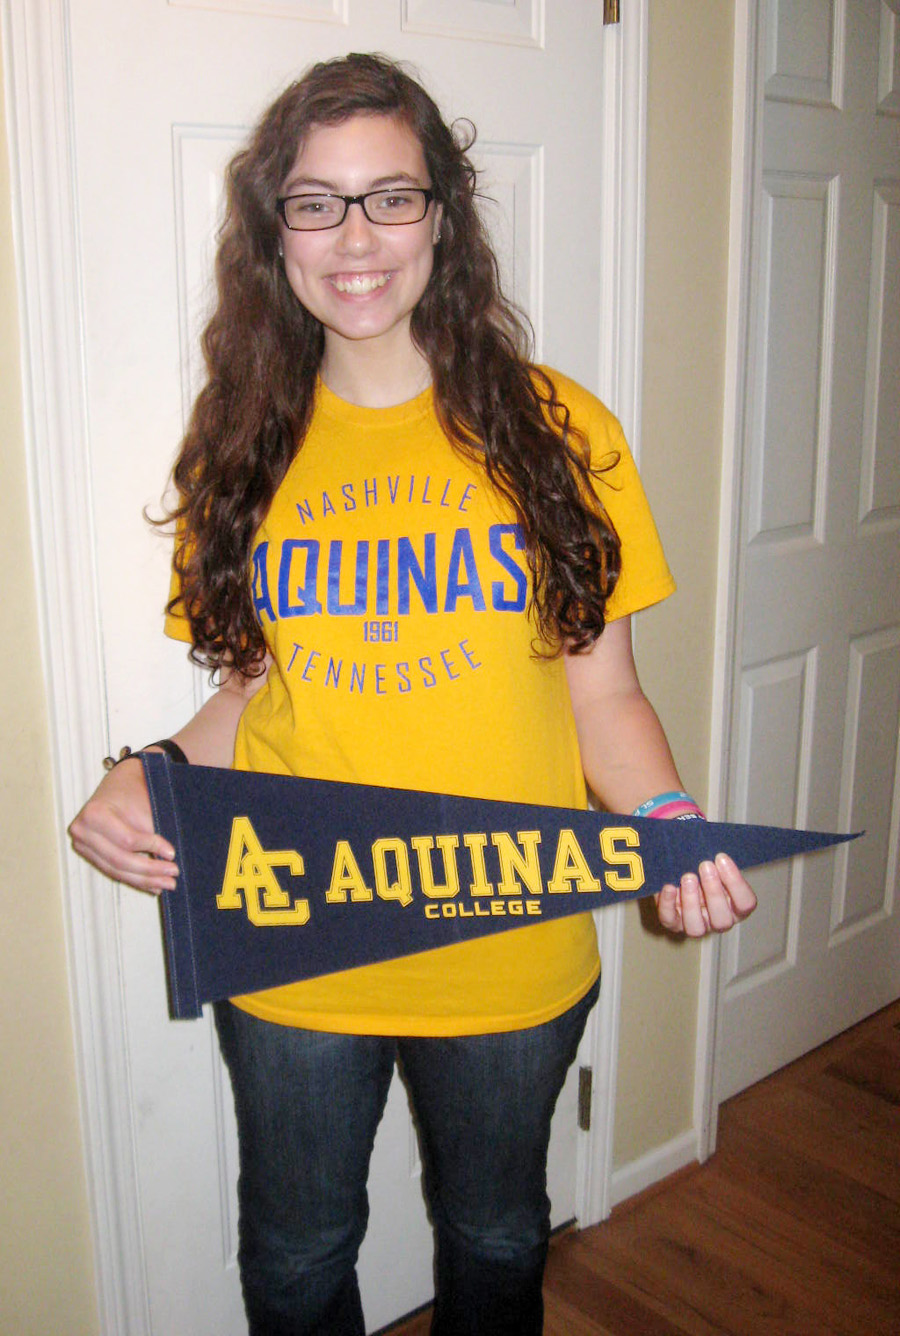 Sarah Accepted to Aquinas College with Vice President Scholarship